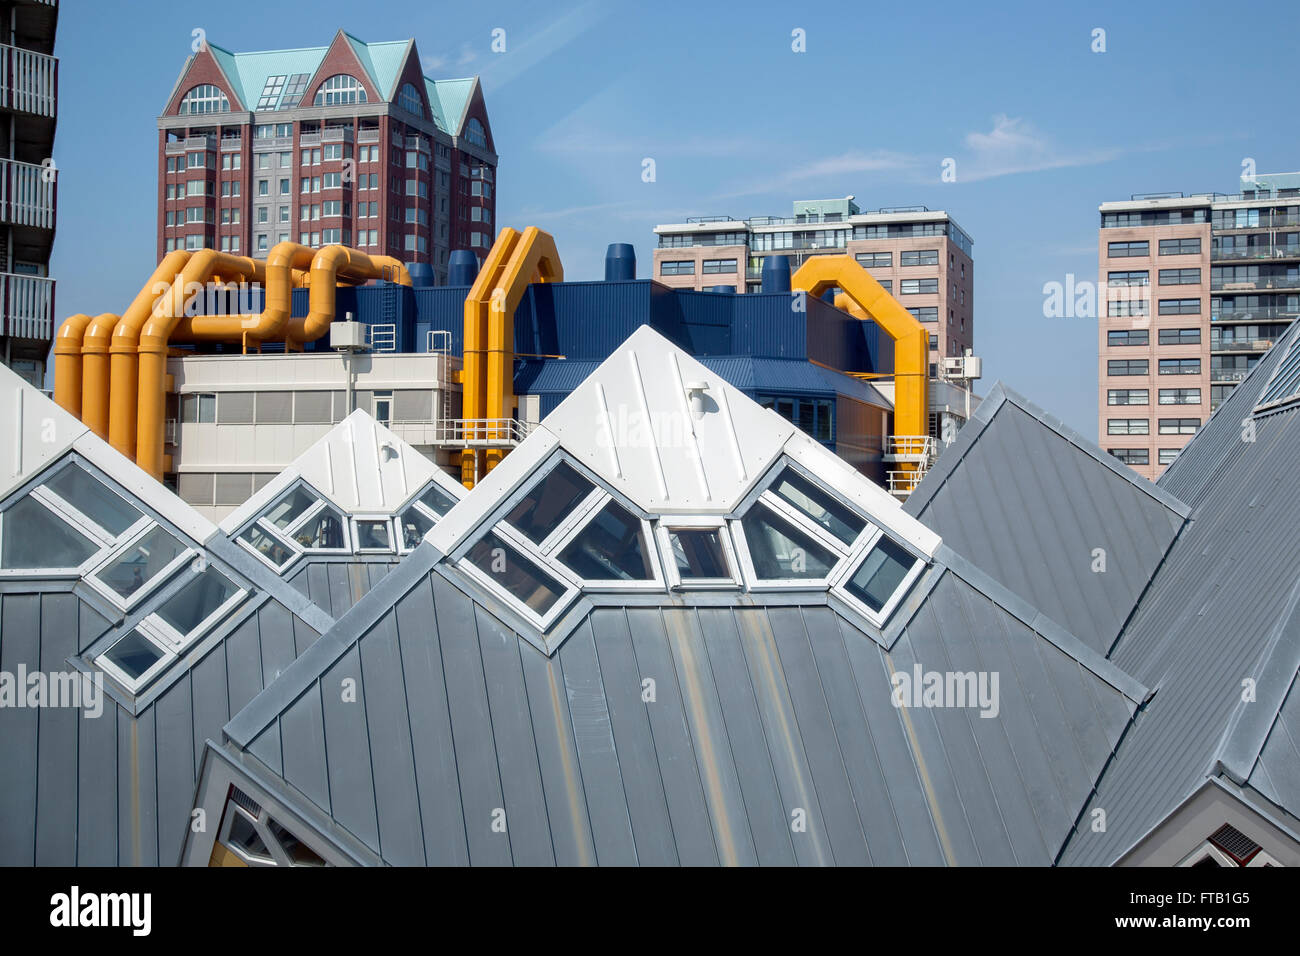 Cube Houses, Blaakse Bos Housing Project by Blom, Rotterdam; Holland Stock Photo